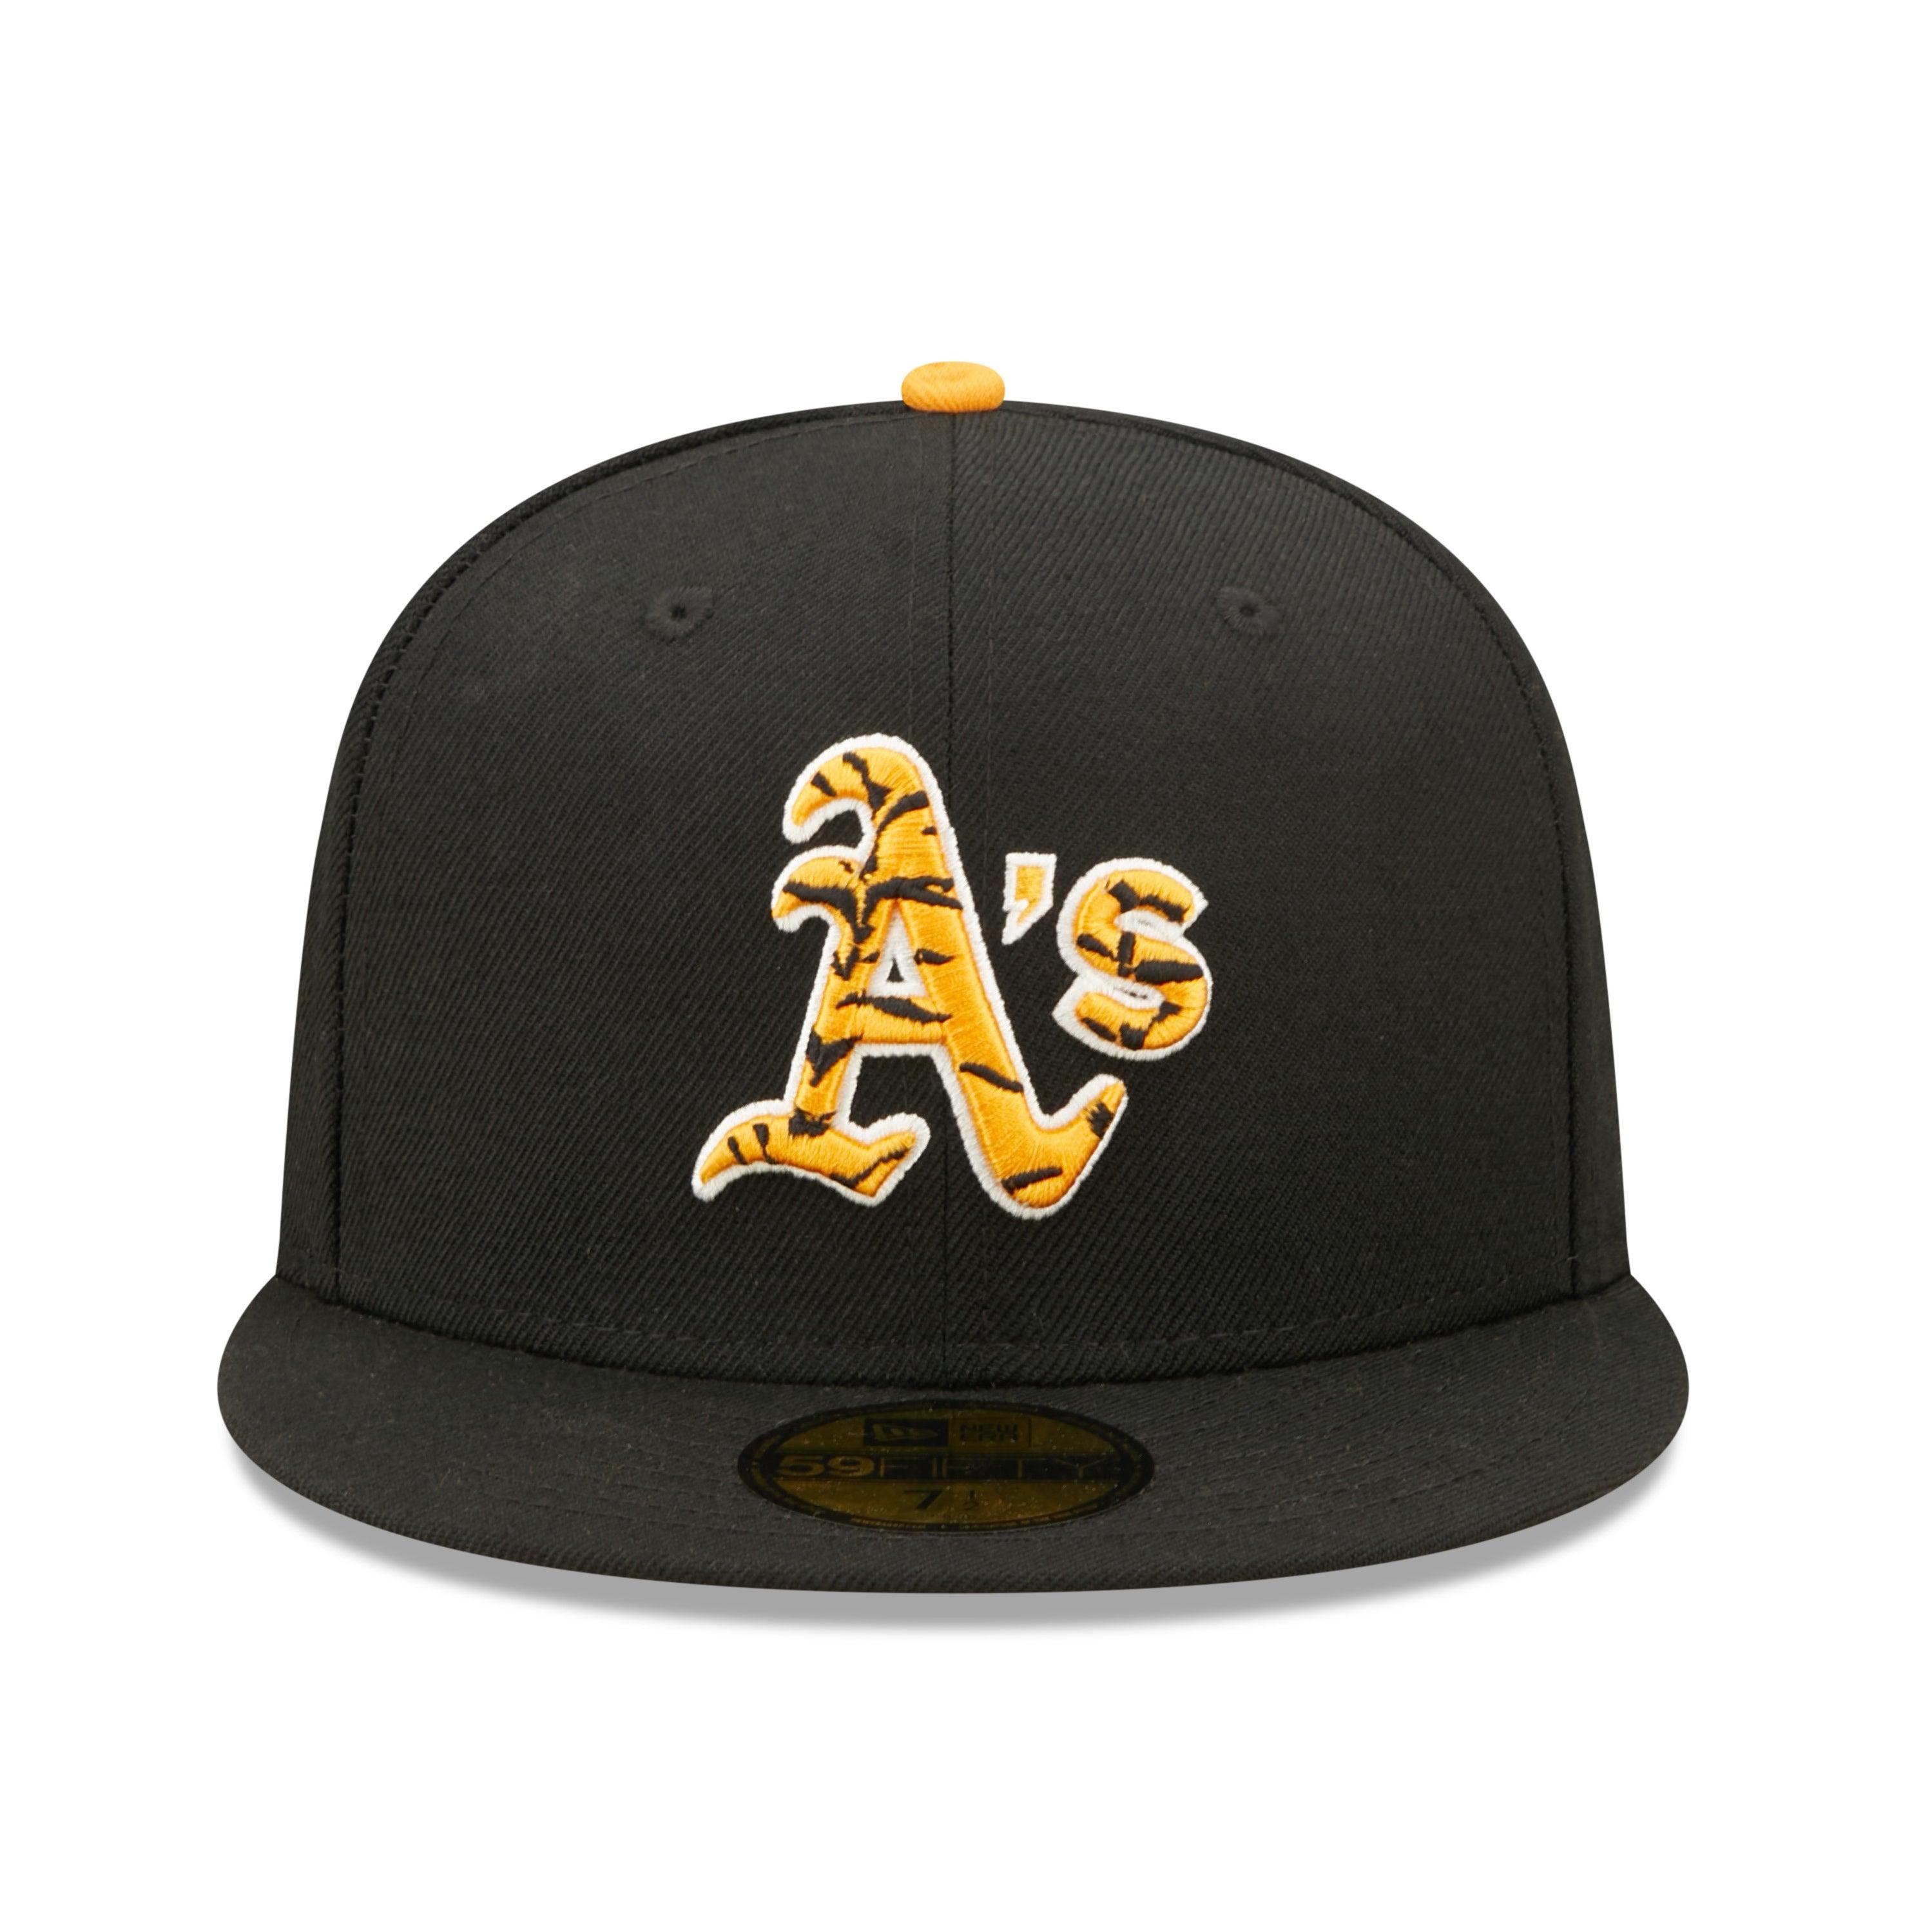 NEW ERA 59FIFTY WORLD SERIES 1989 MLB OAKLAND ATHLETICS TIGERFILL FITTED CAP - FAM